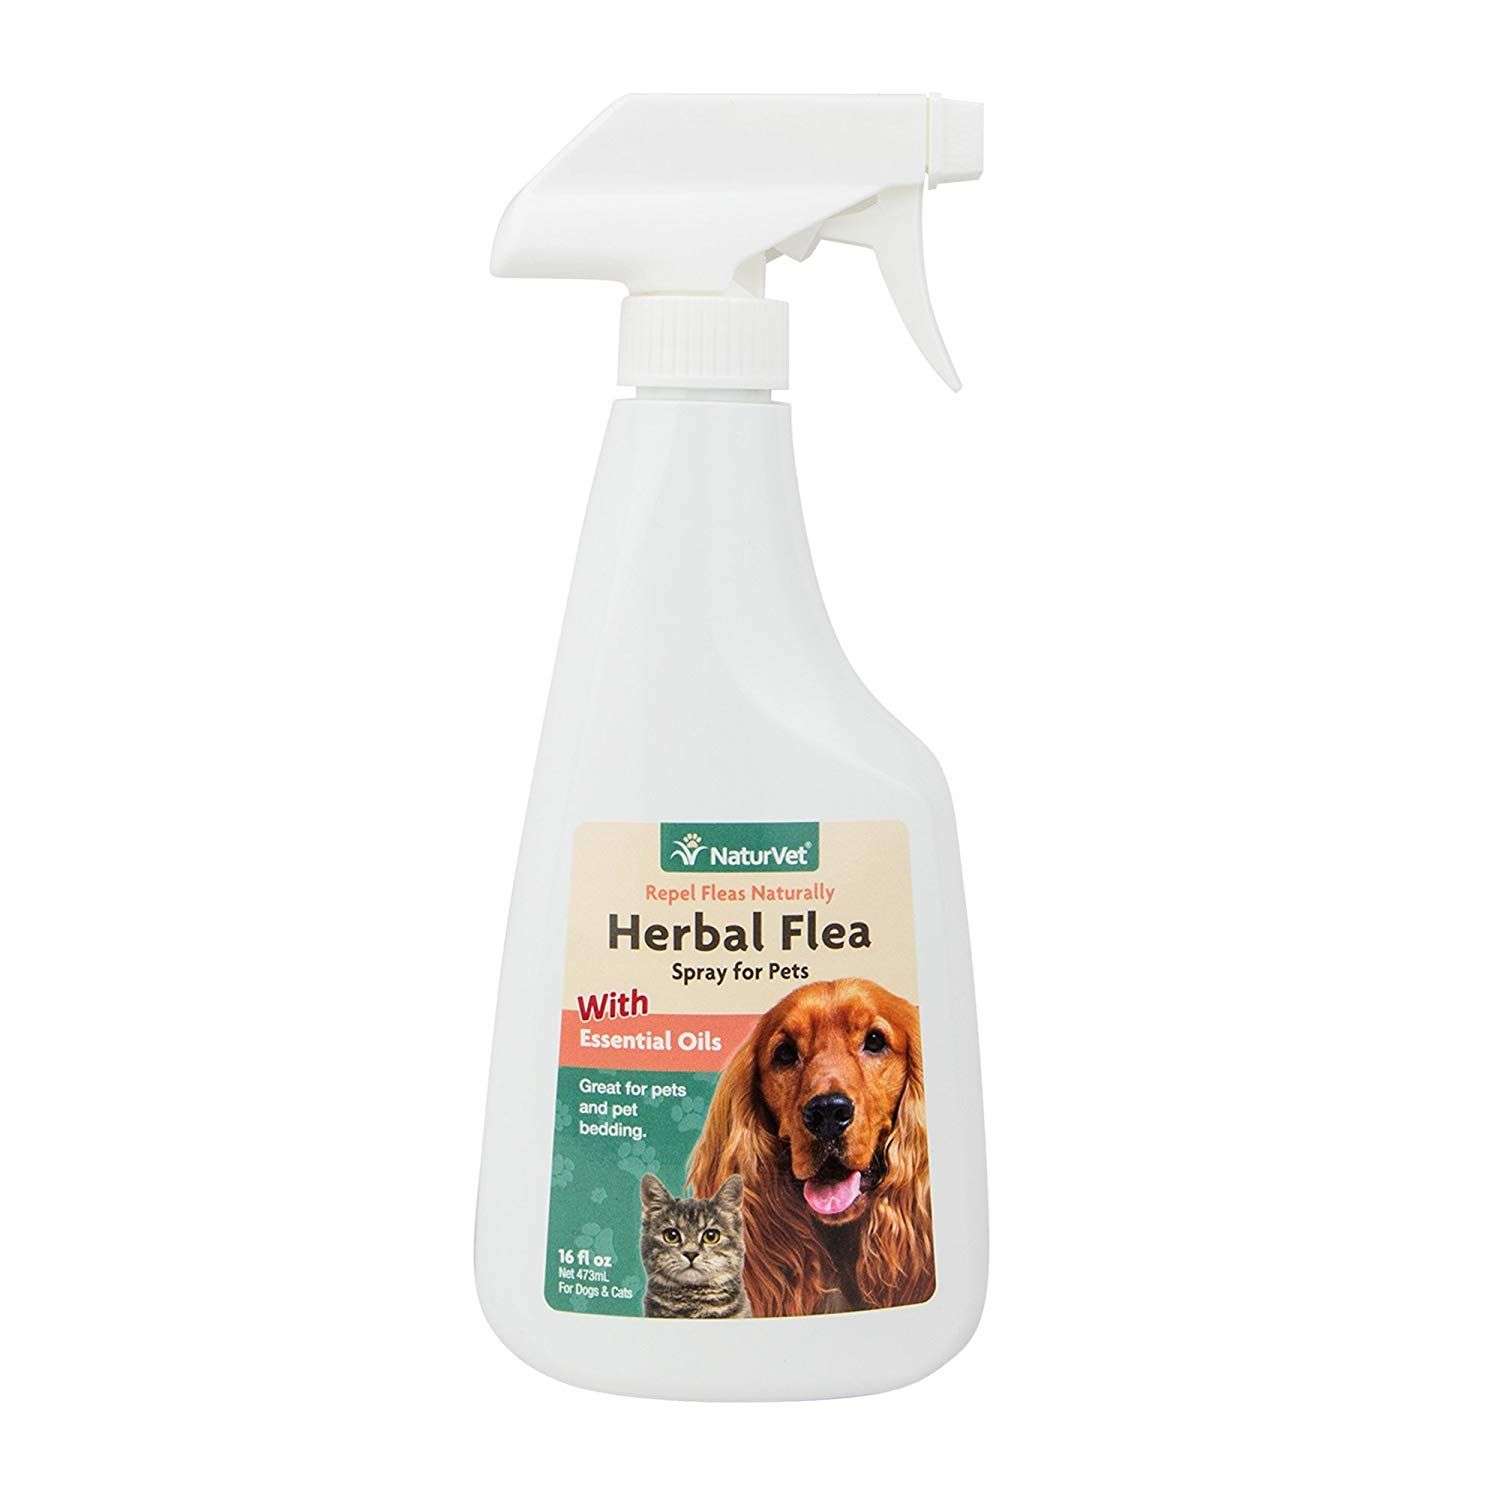 NaturVet Herbal Flea Spray with Essential Oils for Dogs and Cats, 16 oz ...